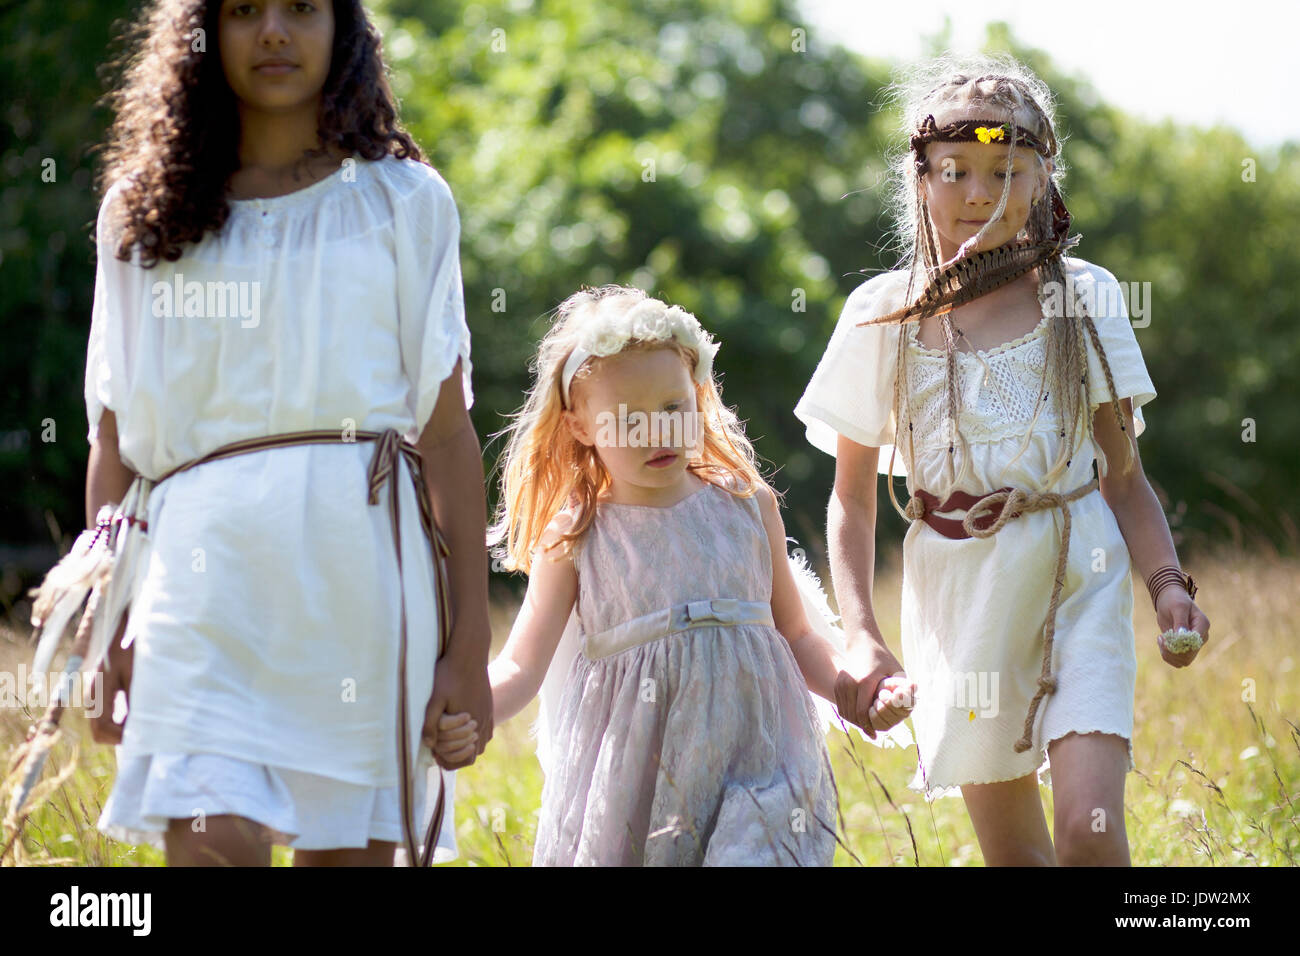 Girls in costumes walking outdoors Stock Photo